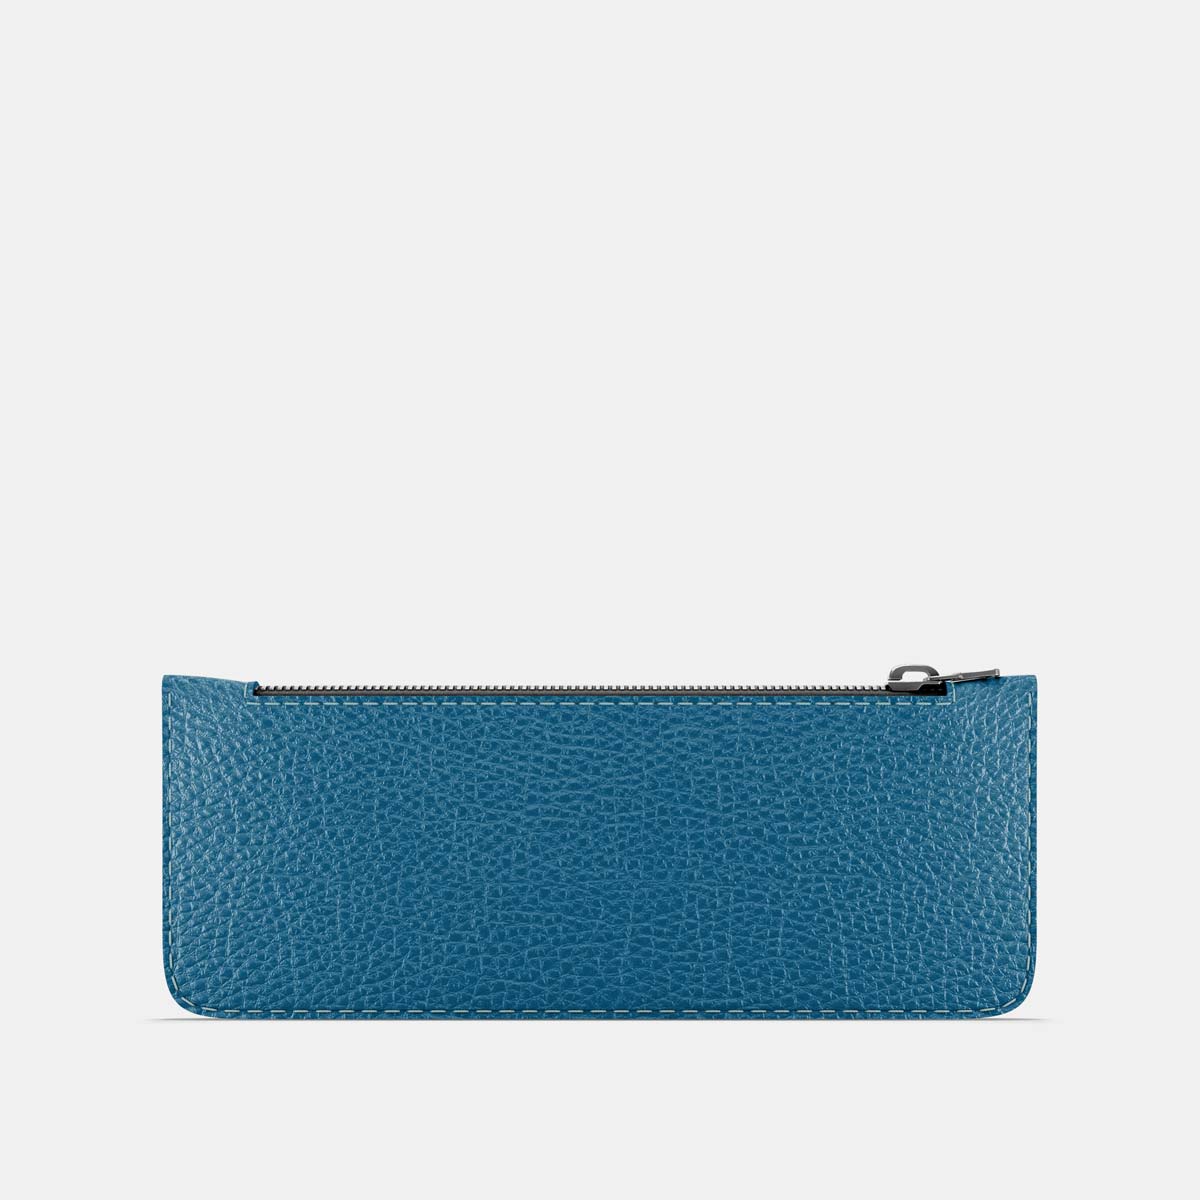 Leather Pencil Case - Turquoise Blue and Orange - RYAN London